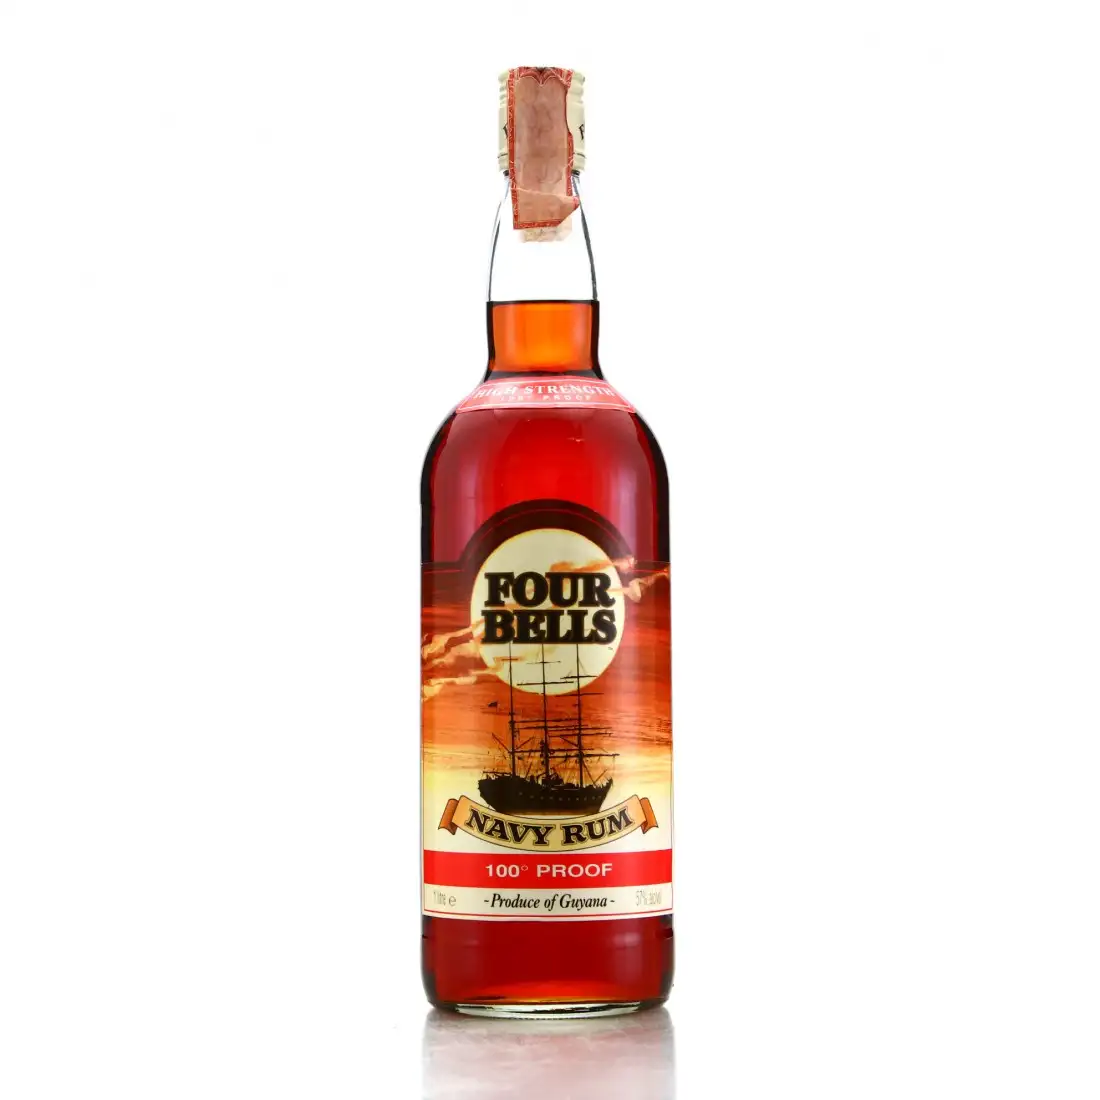 Image of the front of the bottle of the rum Four Bells Navy Rum